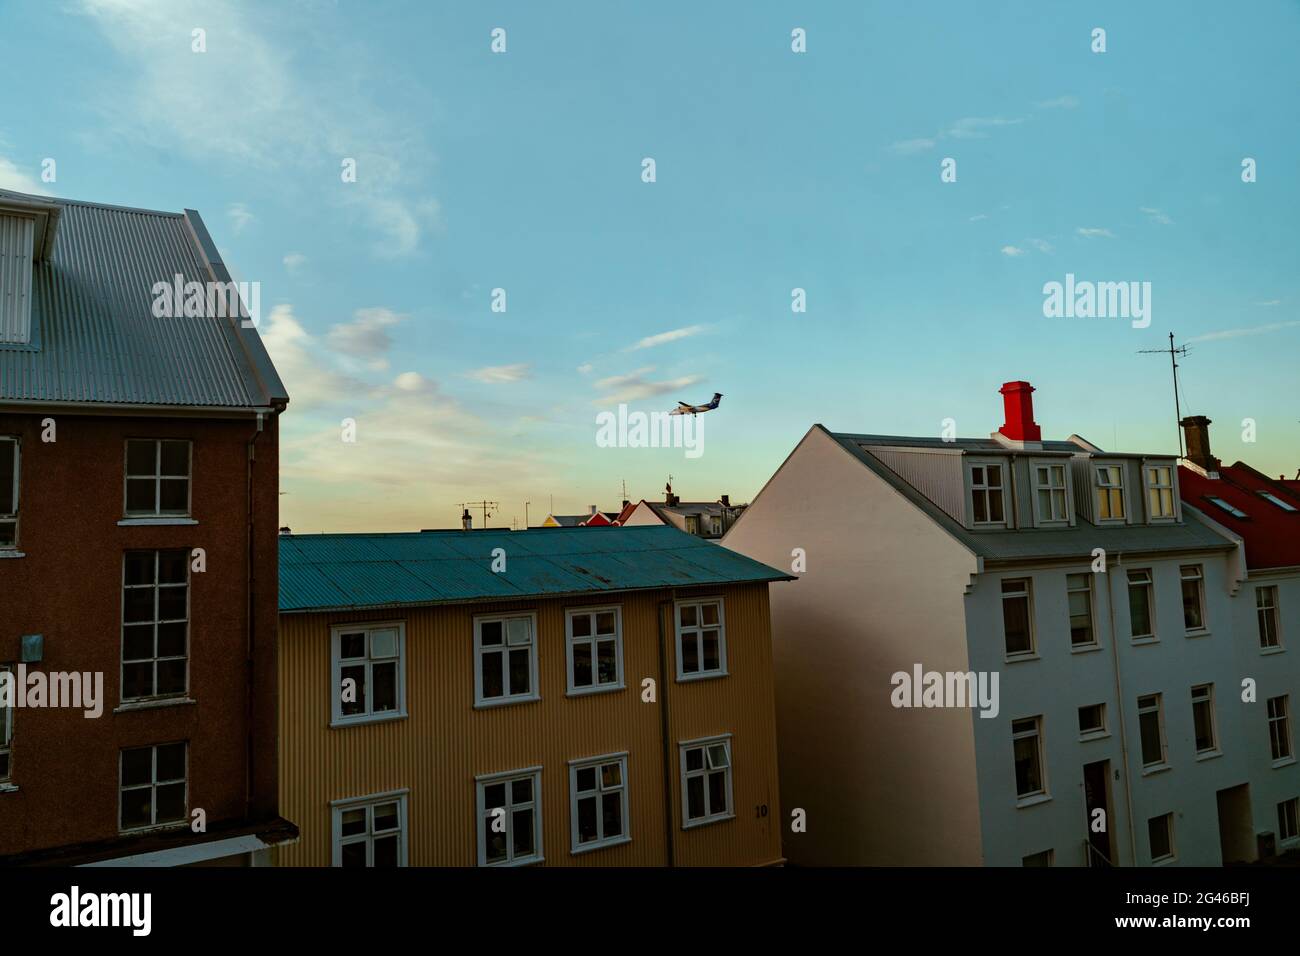 A fokker plane flying low and gliding across the rood of several residential houses in the city center of Reykjavik, Iceland Stock Photo